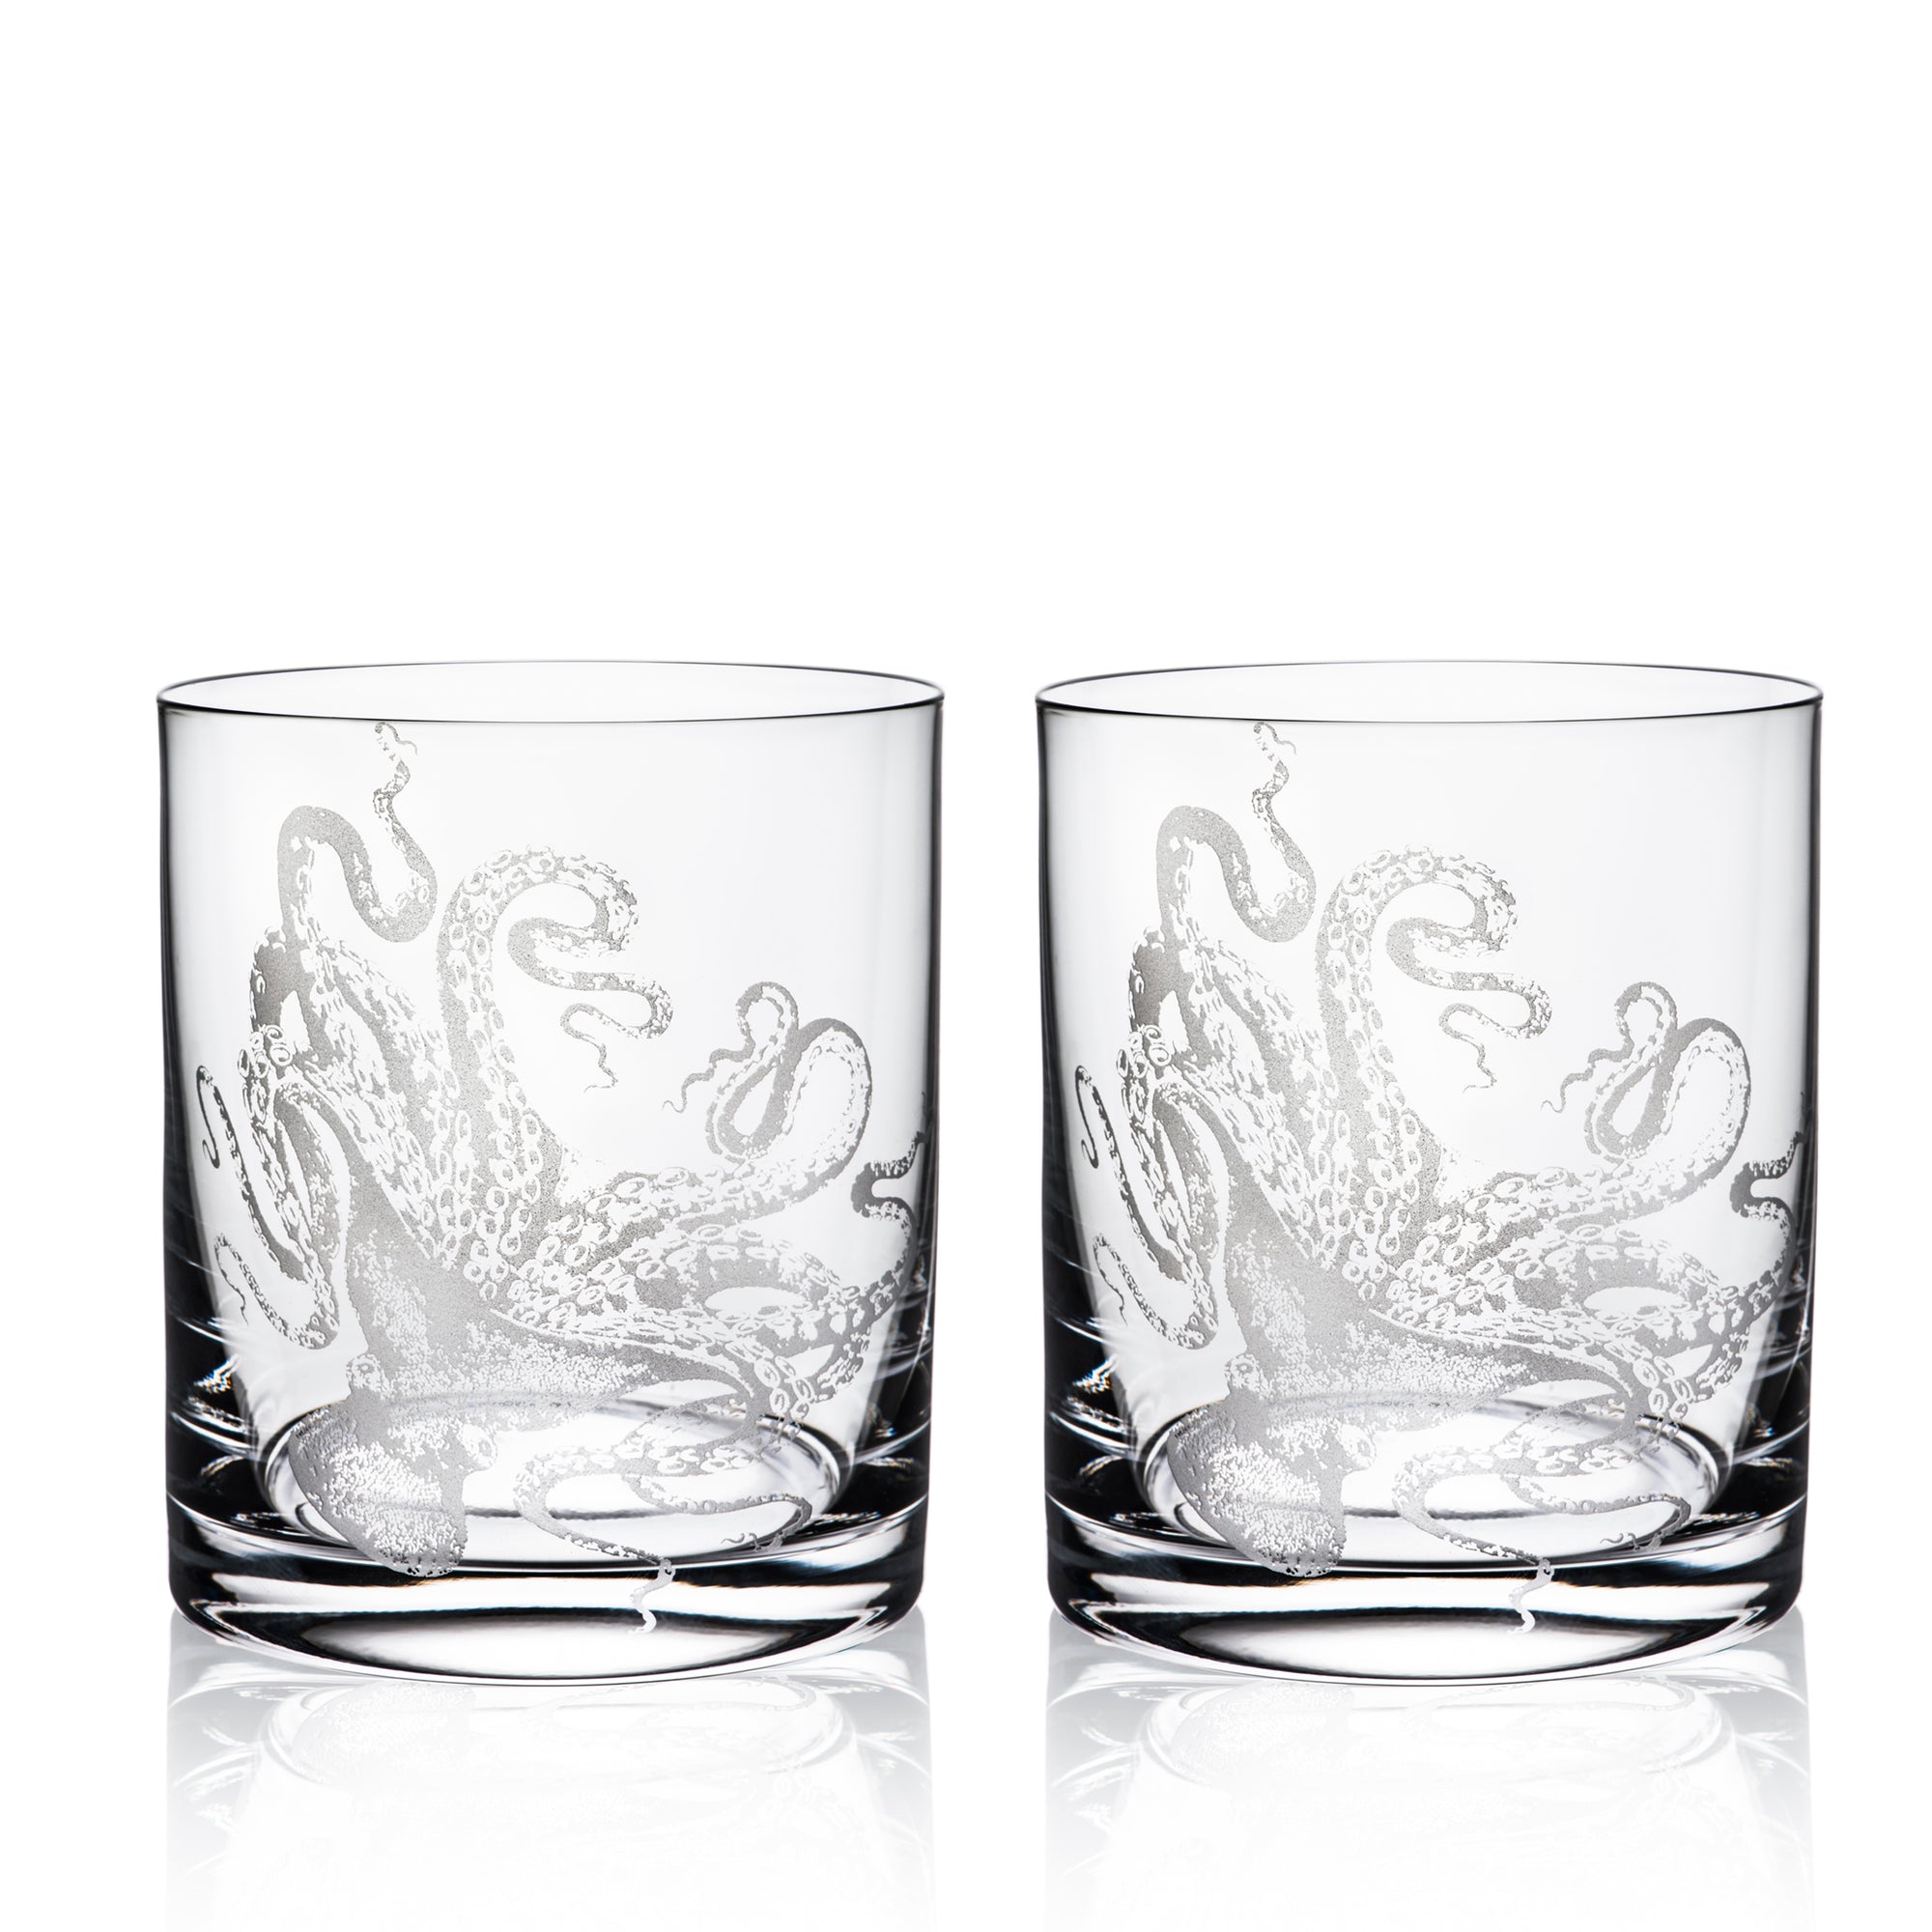 Lucy Tumbler Glasseware Set of 2 Hand etched crystal drinkware glasses from Caskata